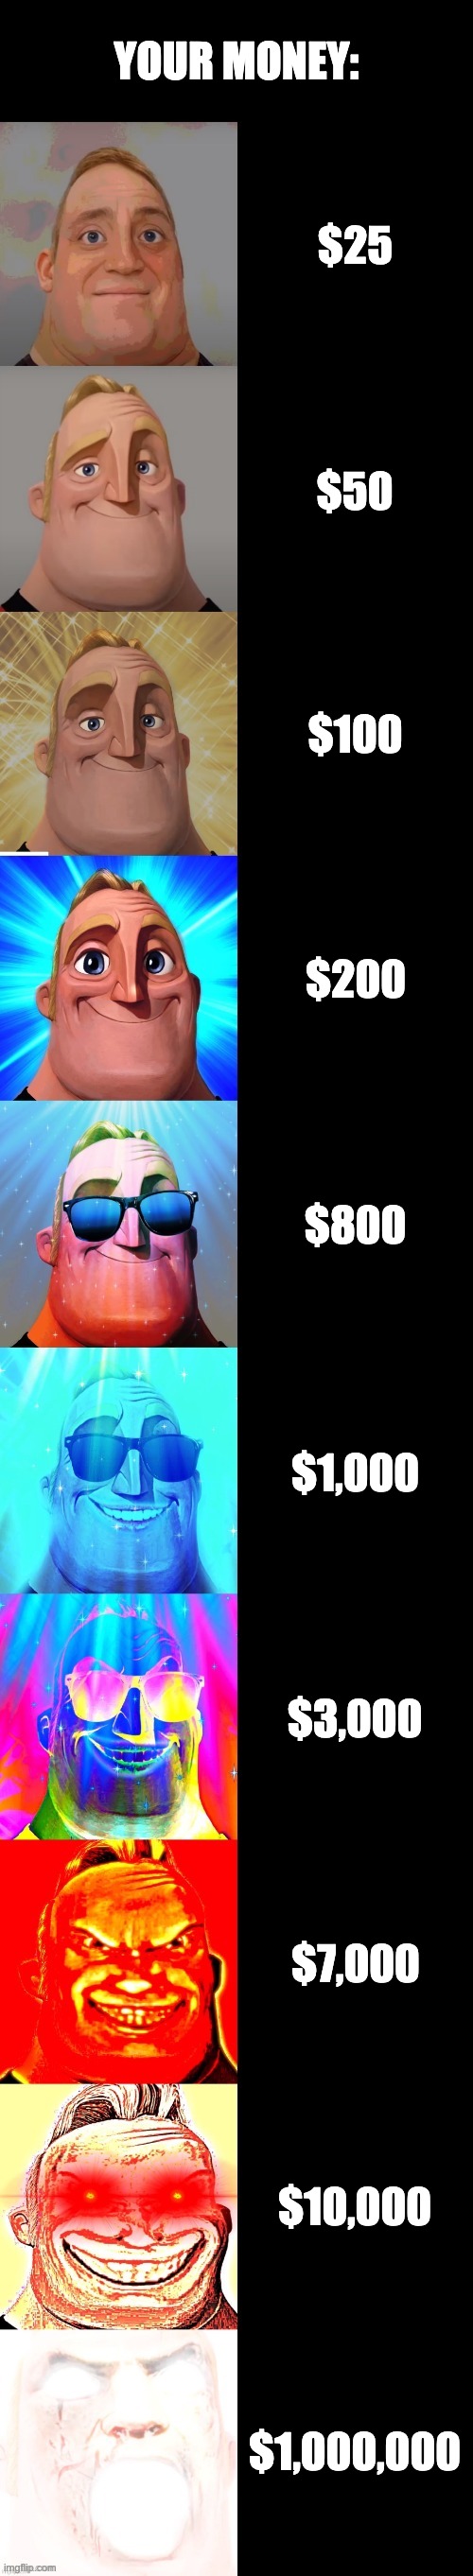 Mr. Incredible becoming canny - Your money | YOUR MONEY:; $25; $50; $100; $200; $800; $1,000; $3,000; $7,000; $10,000; $1,000,000 | image tagged in mr incredible becoming canny | made w/ Imgflip meme maker